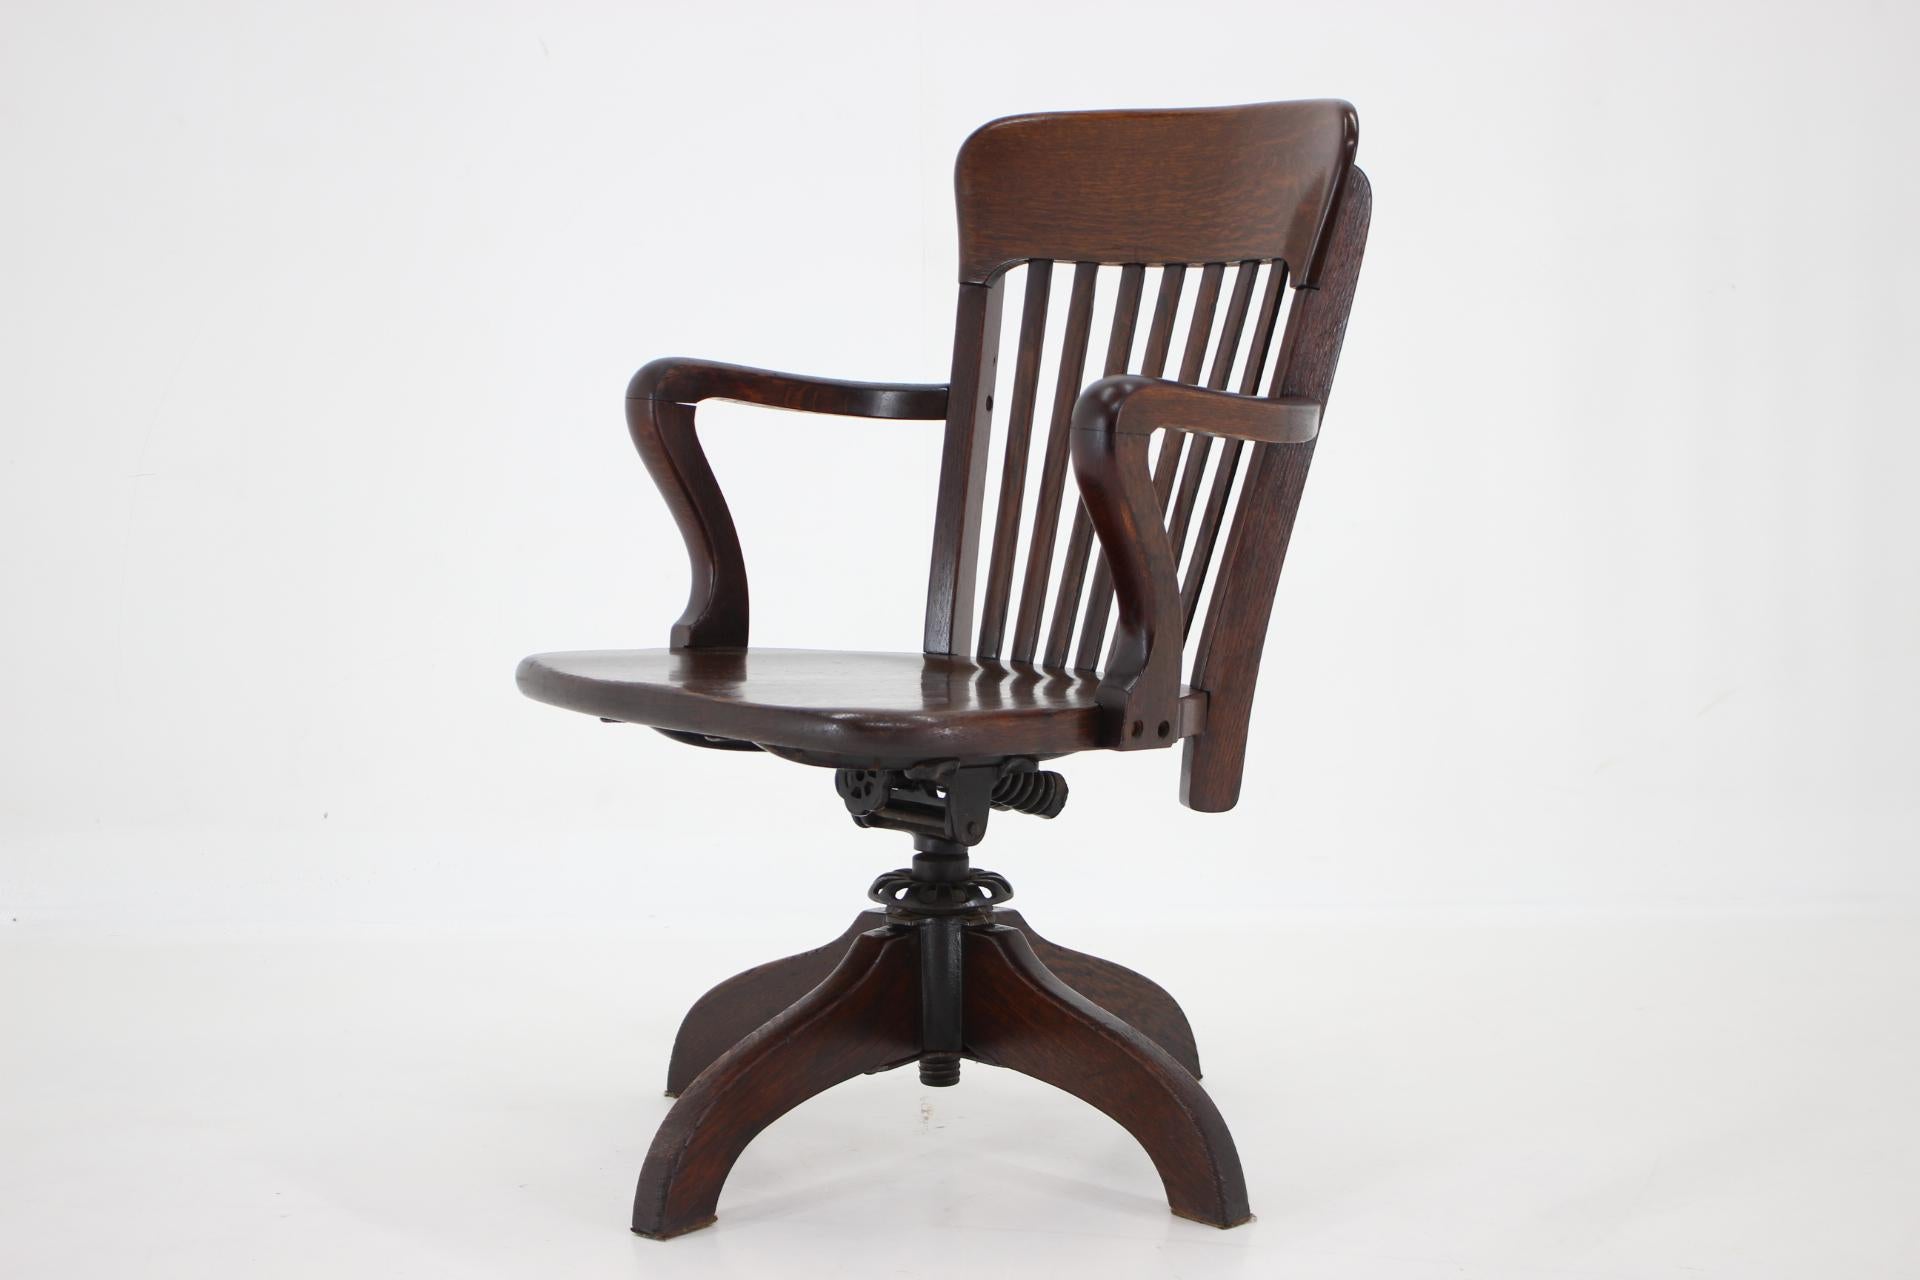 North American 1930s, American Wooden Swivel and Reclining Desk Chair